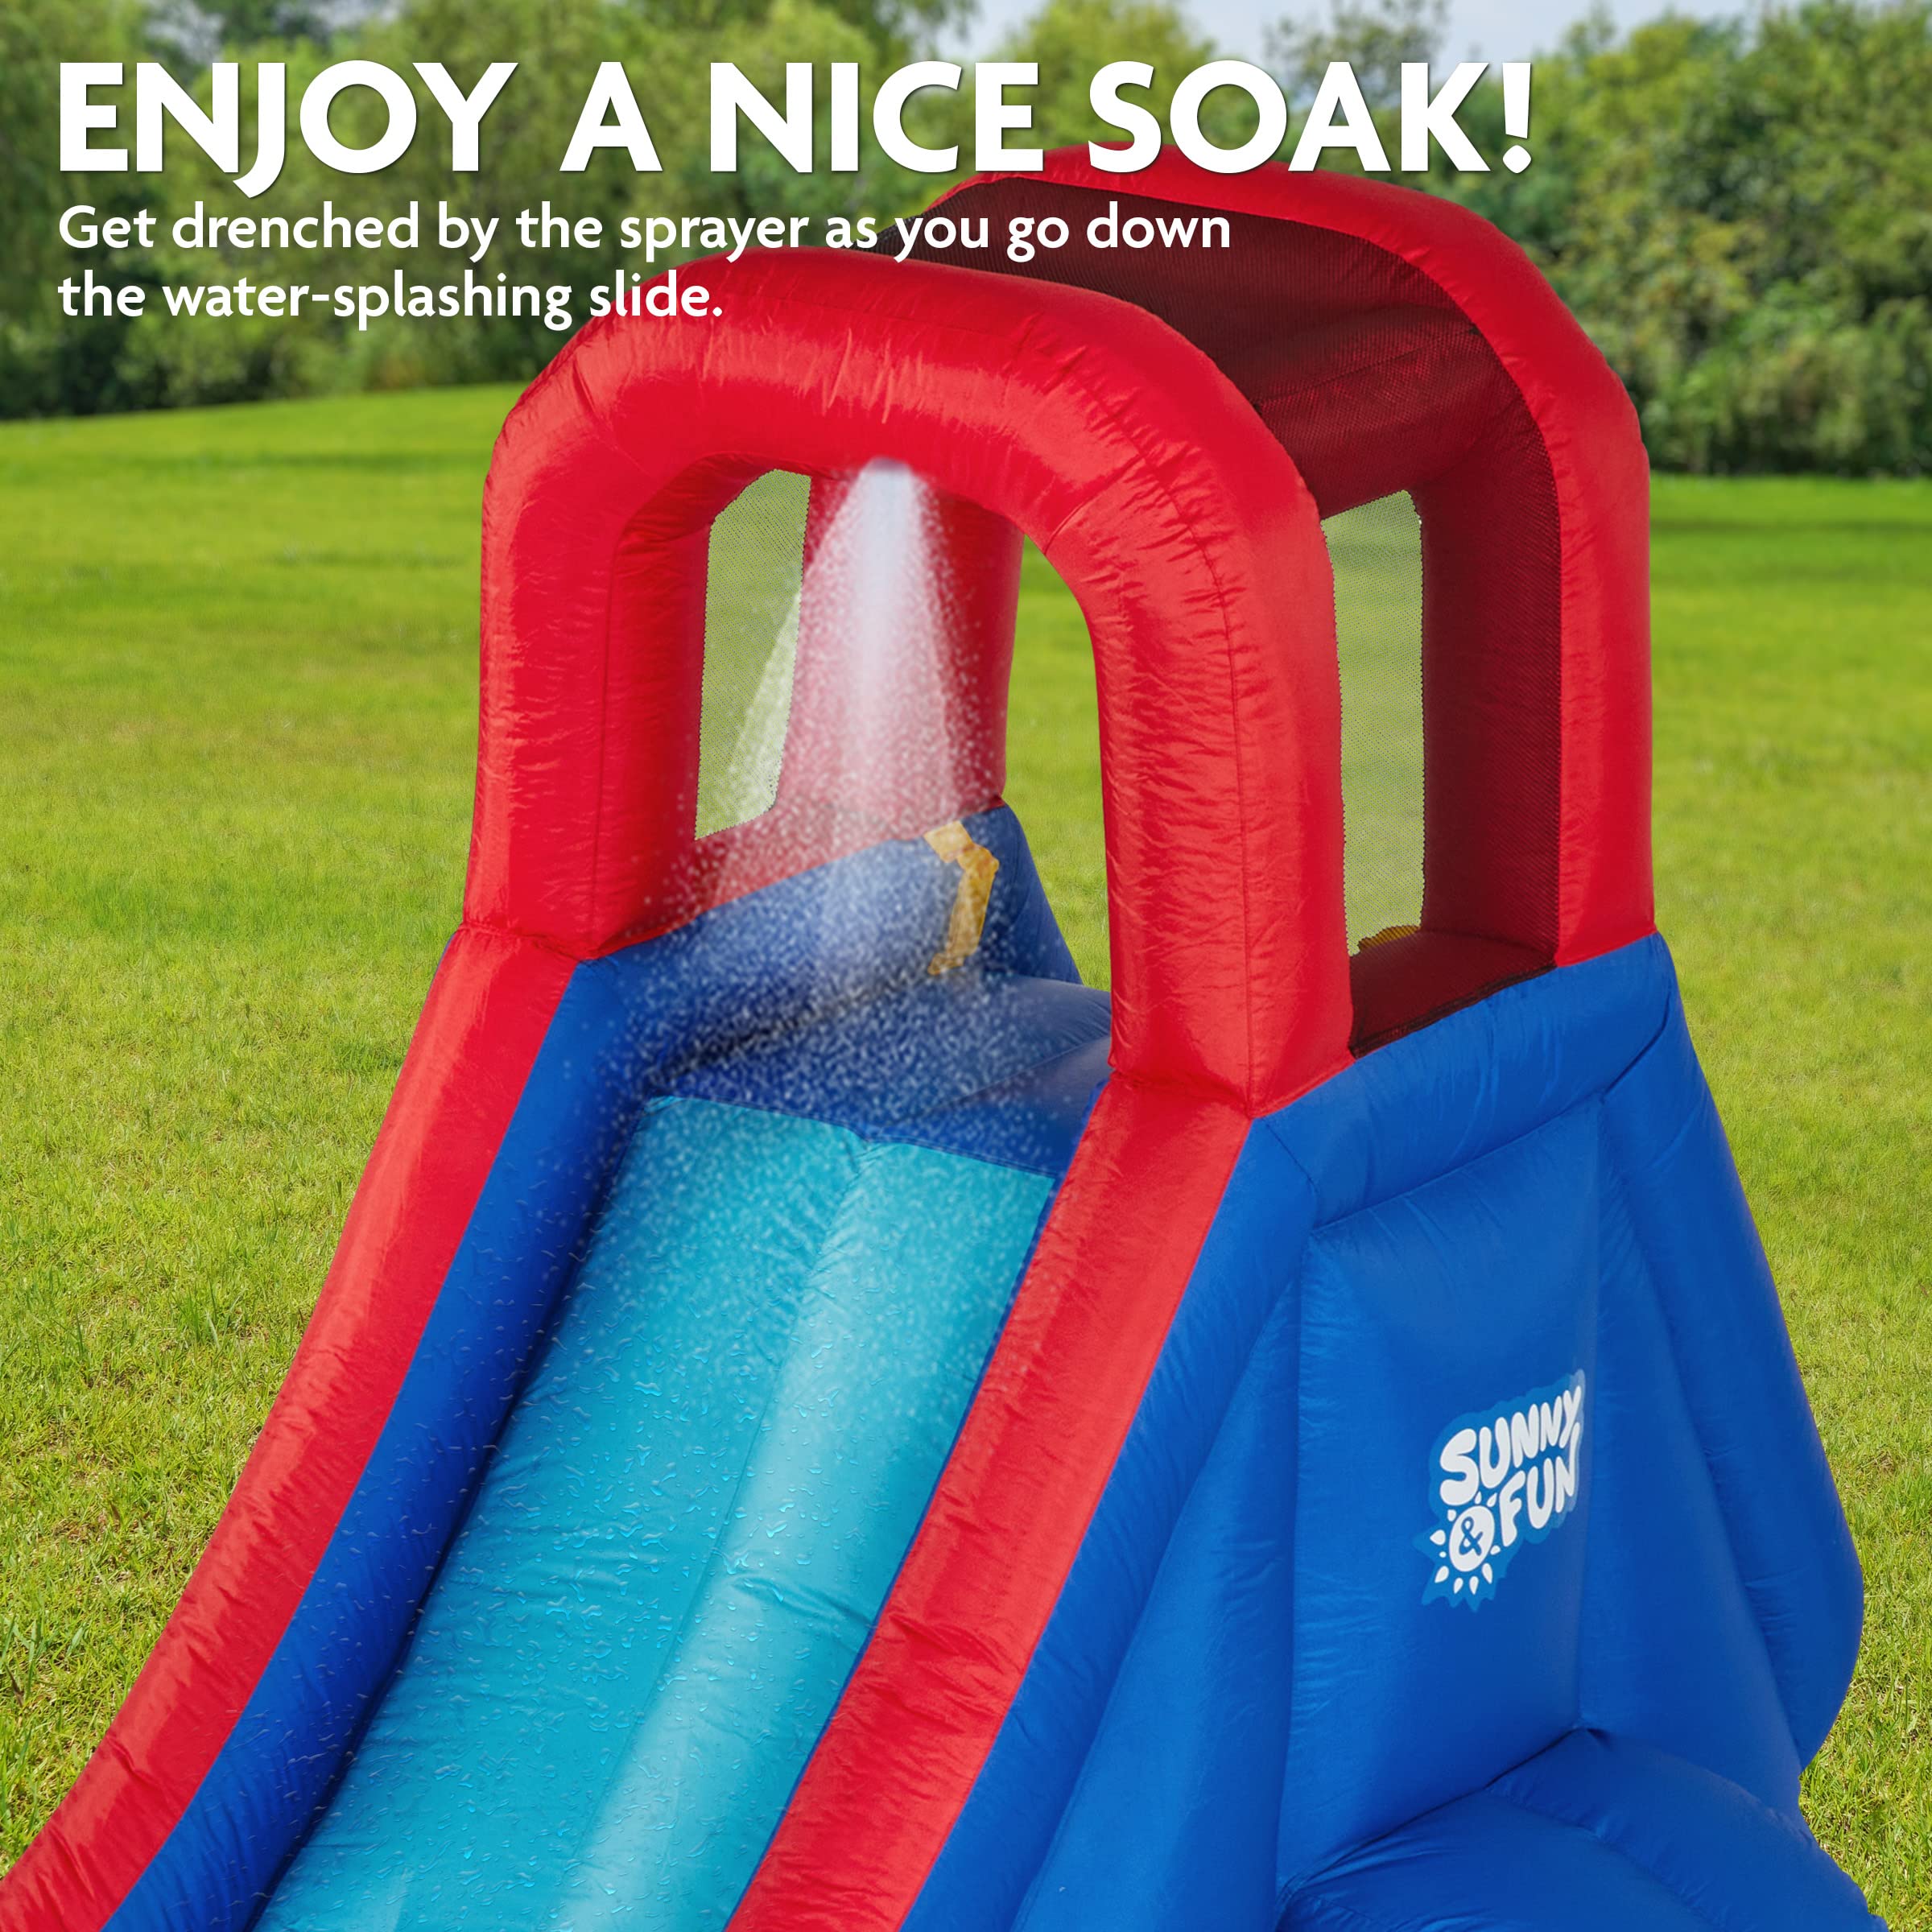 Sunny & Fun Inflatable Single Ring Water Slide Park – Heavy-Duty for Outdoor Fun - Climbing Wall, Slide & Deep Pool – Easy to Set Up & Inflate with Included Air Pump & Carrying Case